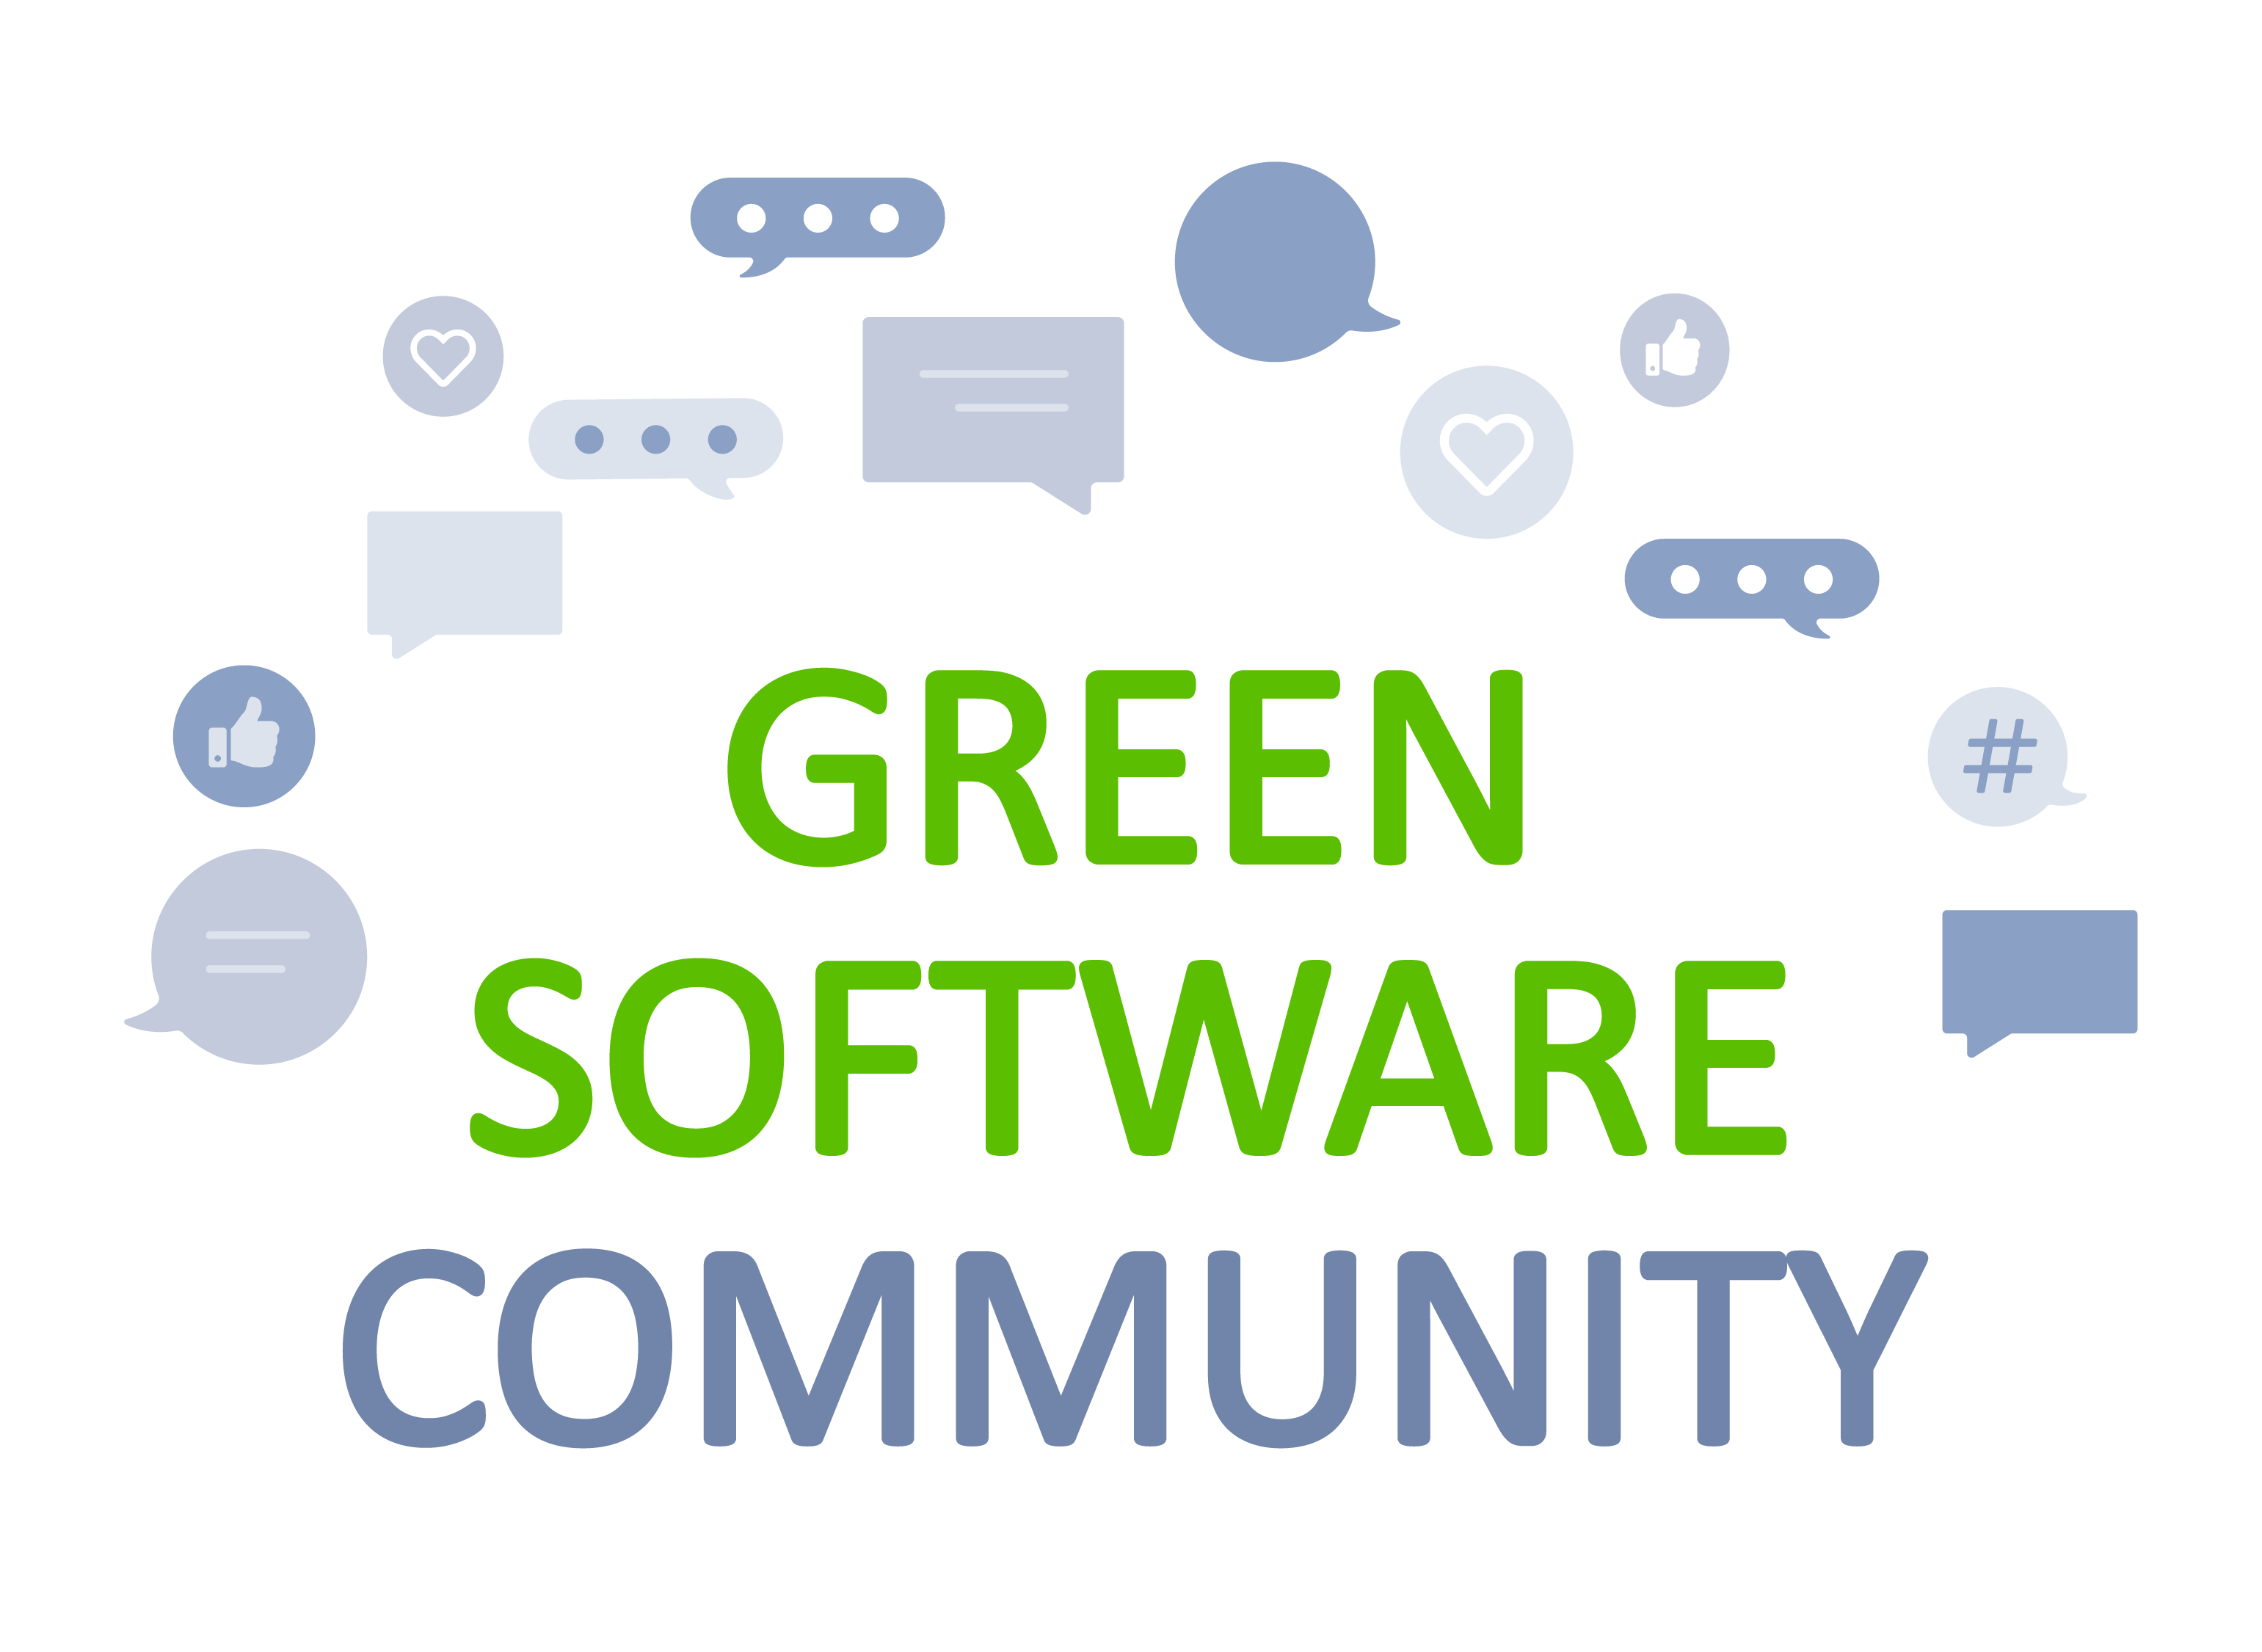 Develop sustainable software